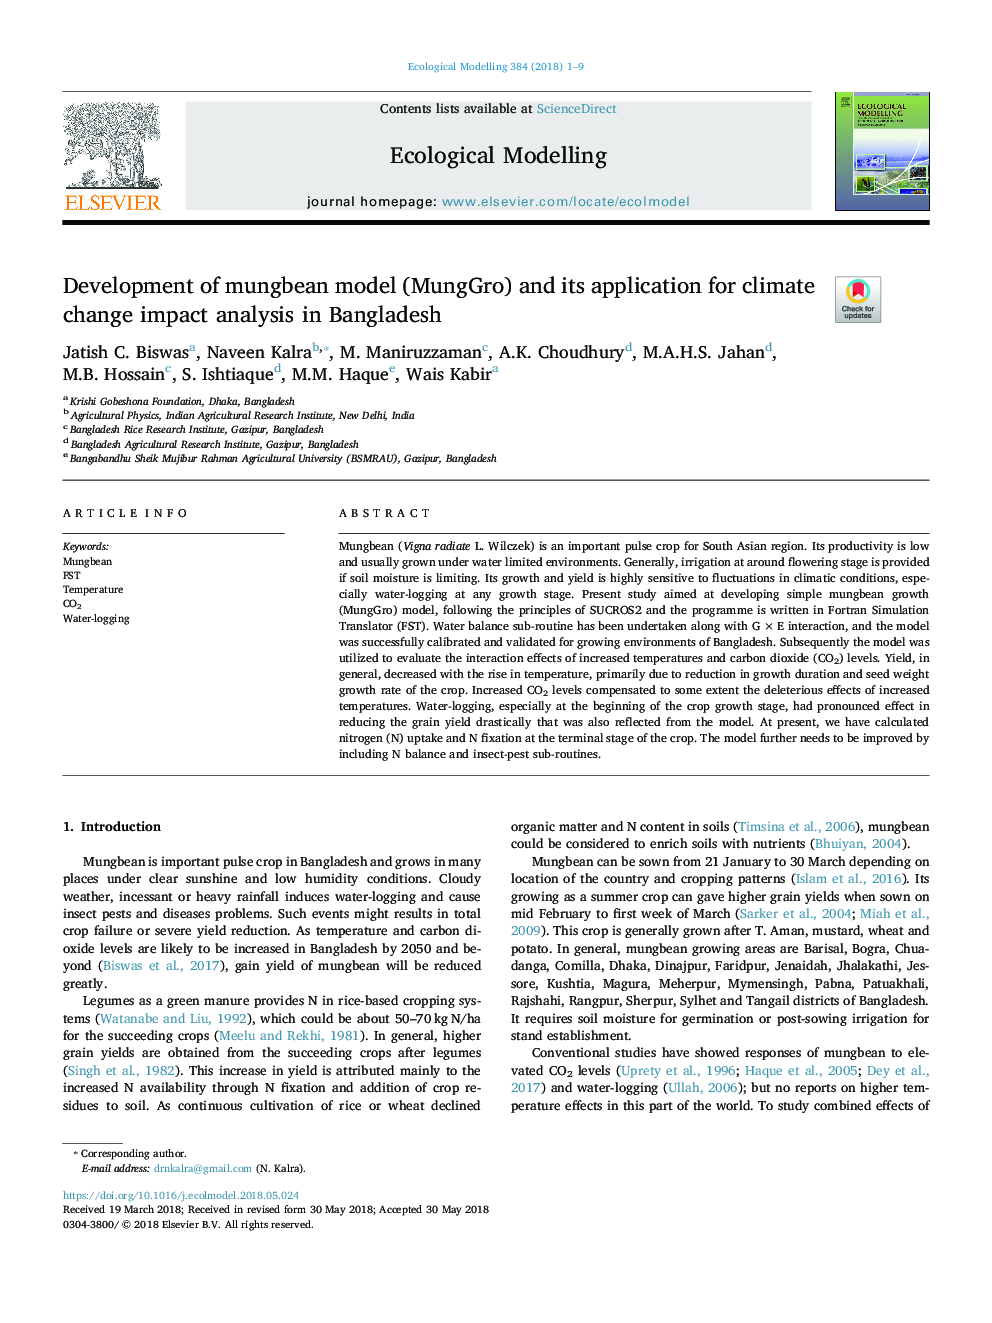 Development of mungbean model (MungGro) and its application for climate change impact analysis in Bangladesh